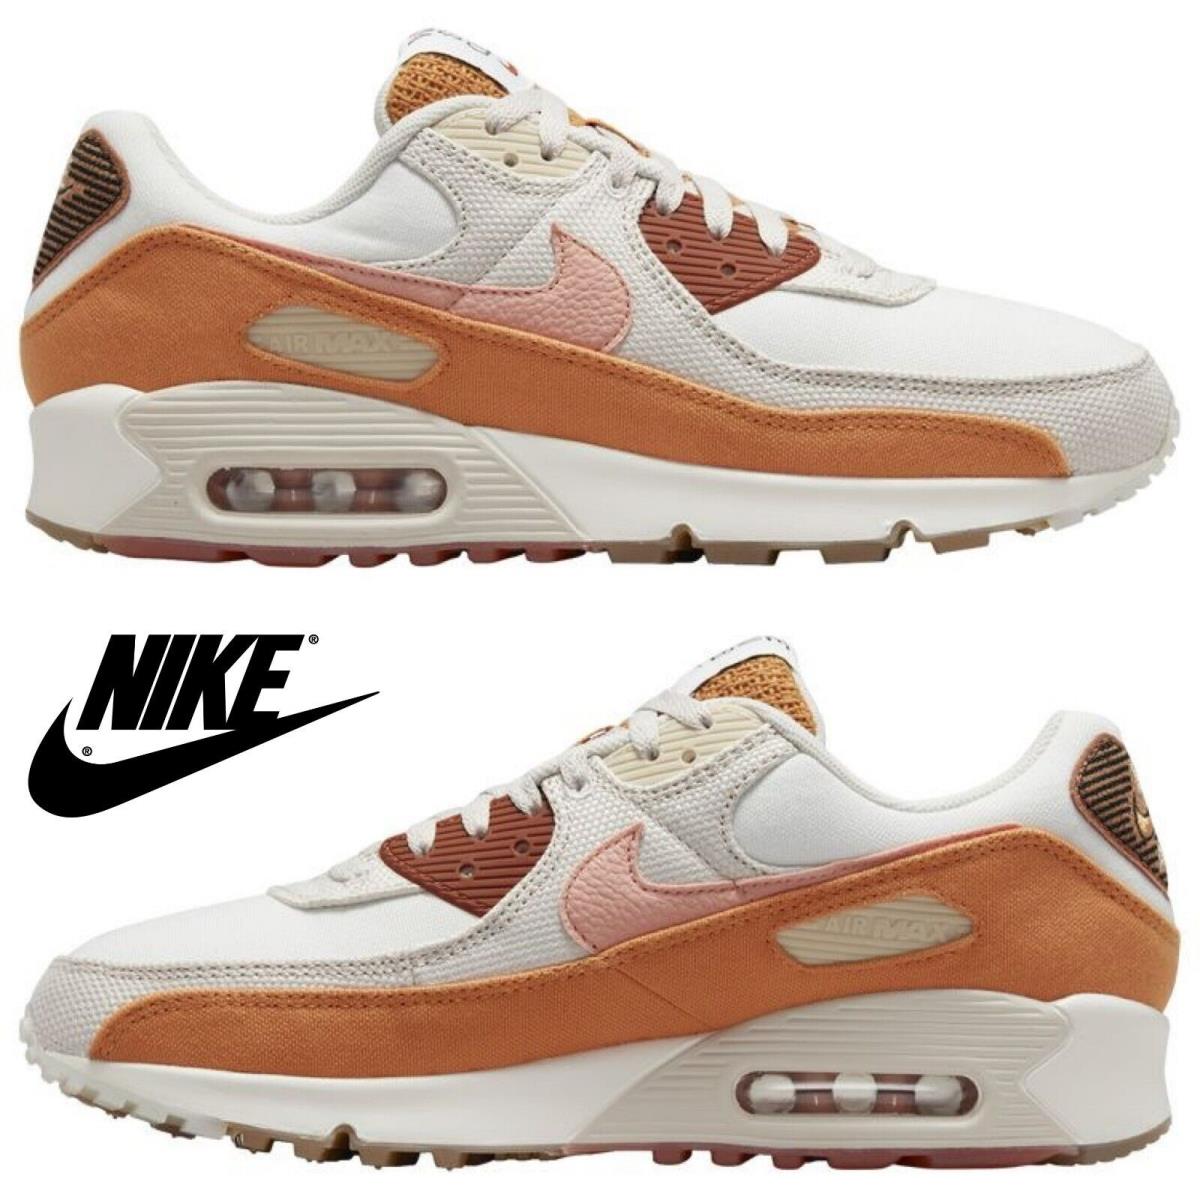 Nike Air Max 90 Casual Men`s Sneakers Running Athletic Sport Comfort Shoes Beige - Beige , Sail/Lt Madder Root Maufacturer